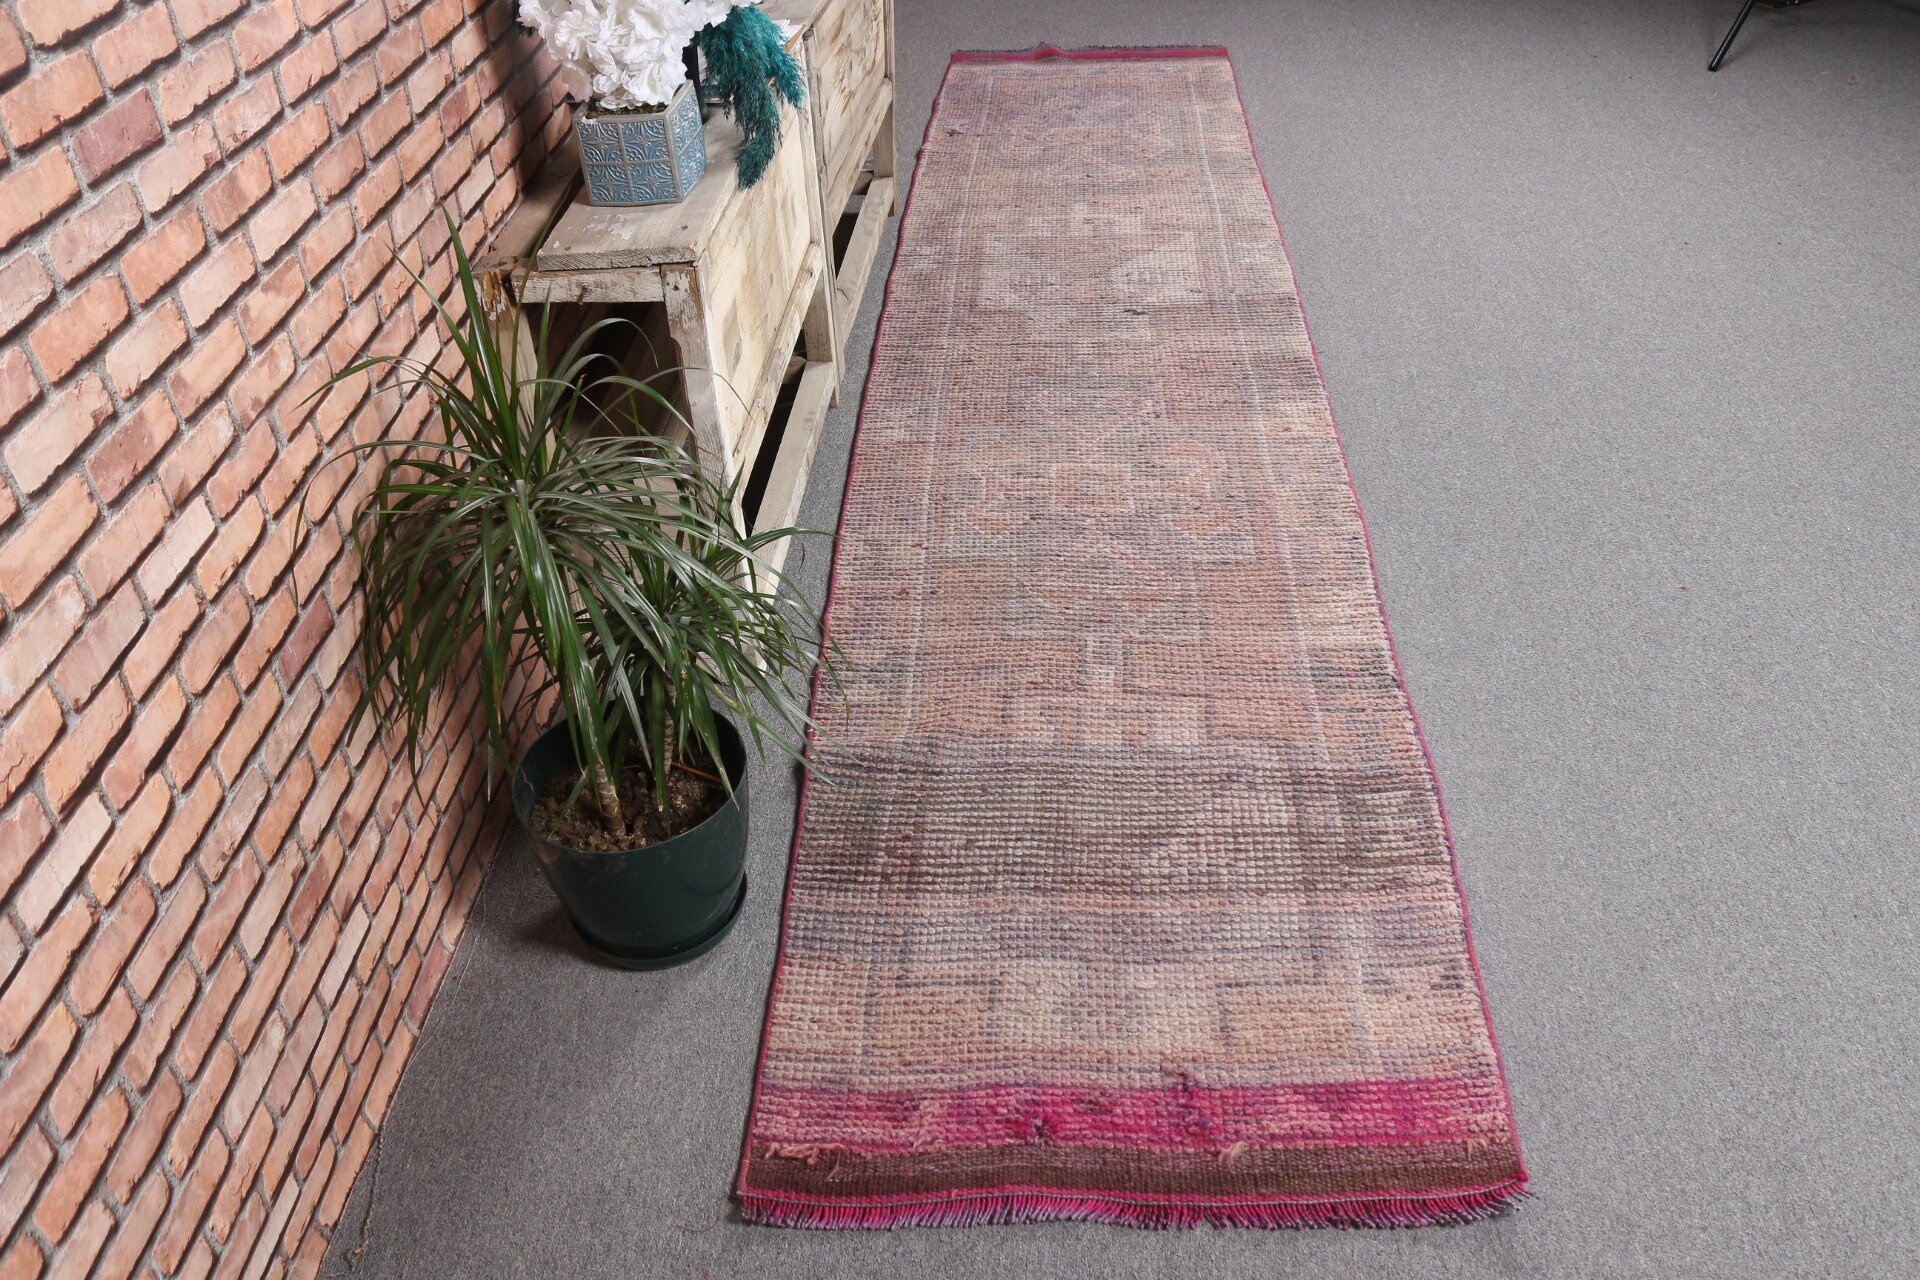 Rugs for Kitchen, Anatolian Rugs, Vintage Rugs, Ethnic Rug, Antique Rugs, Stair Rug, 2.4x11.3 ft Runner Rug, Purple Cool Rug, Turkish Rugs